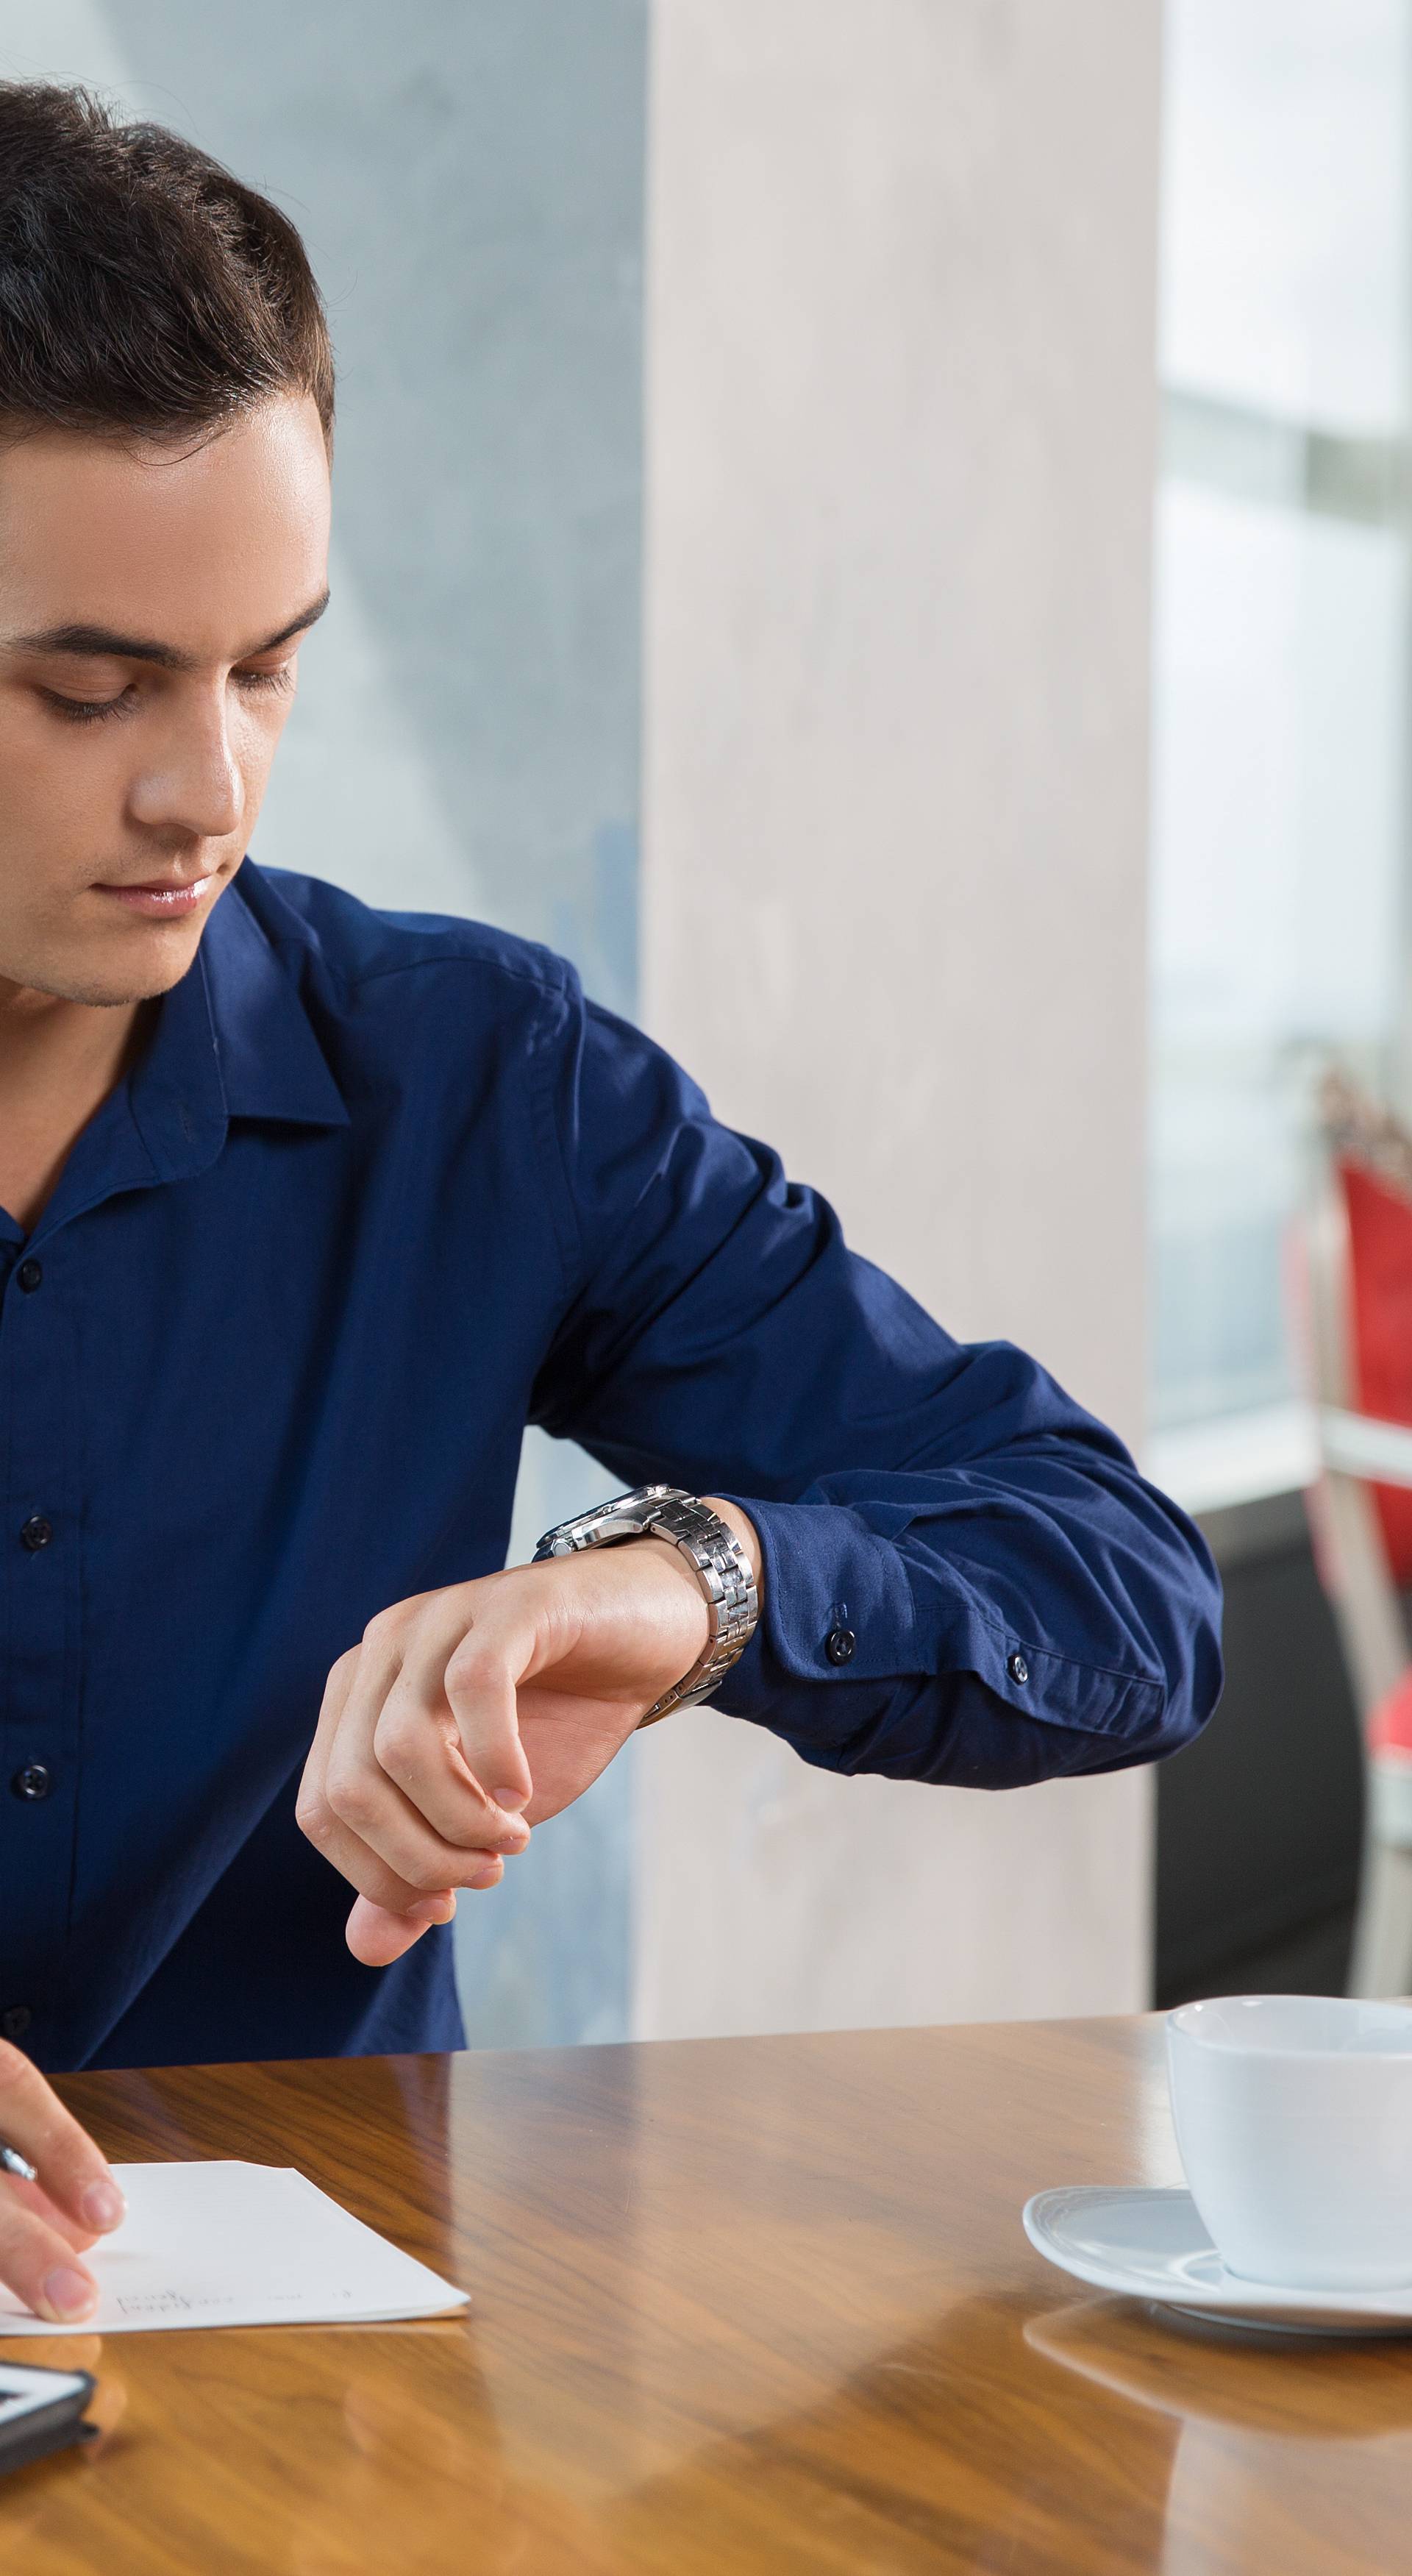 Serious Young Businessman Looking at Wrist Watch